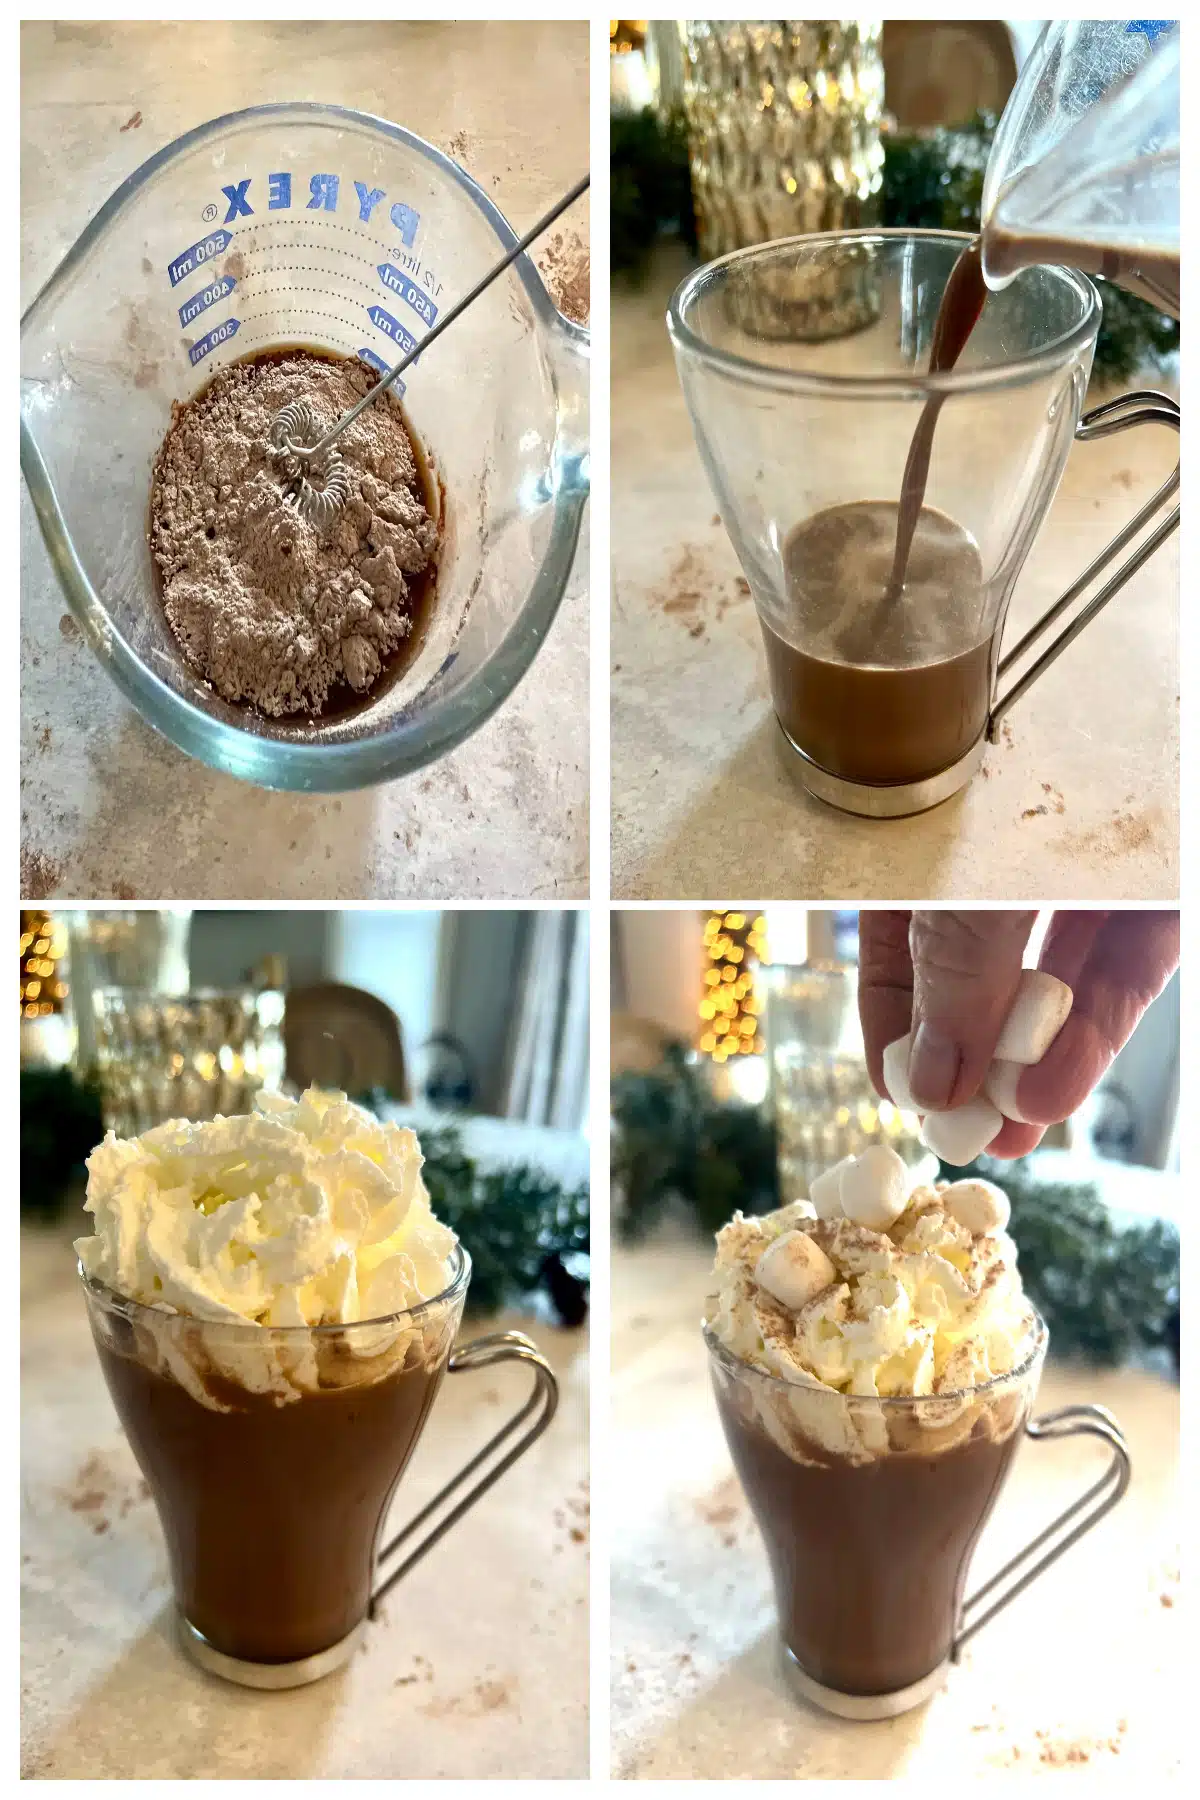 steps for making chocolate coffee